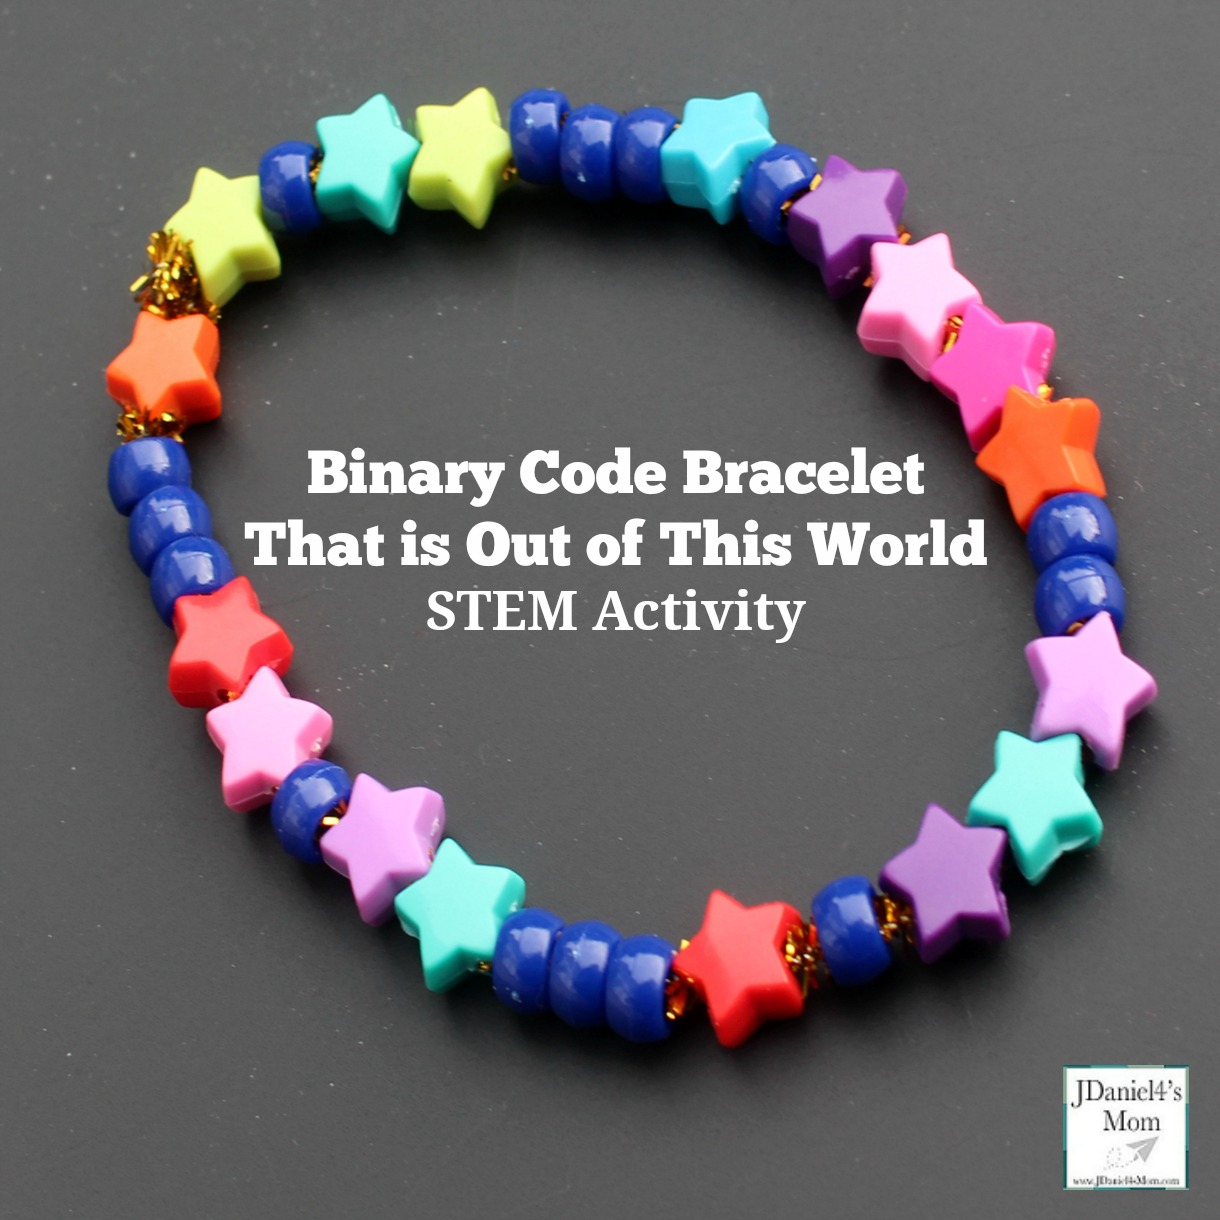 Binary Code Bracelet That is Out of This World - The activity has a printable planning and reflection page. It is a great way to introduce your children to coding.